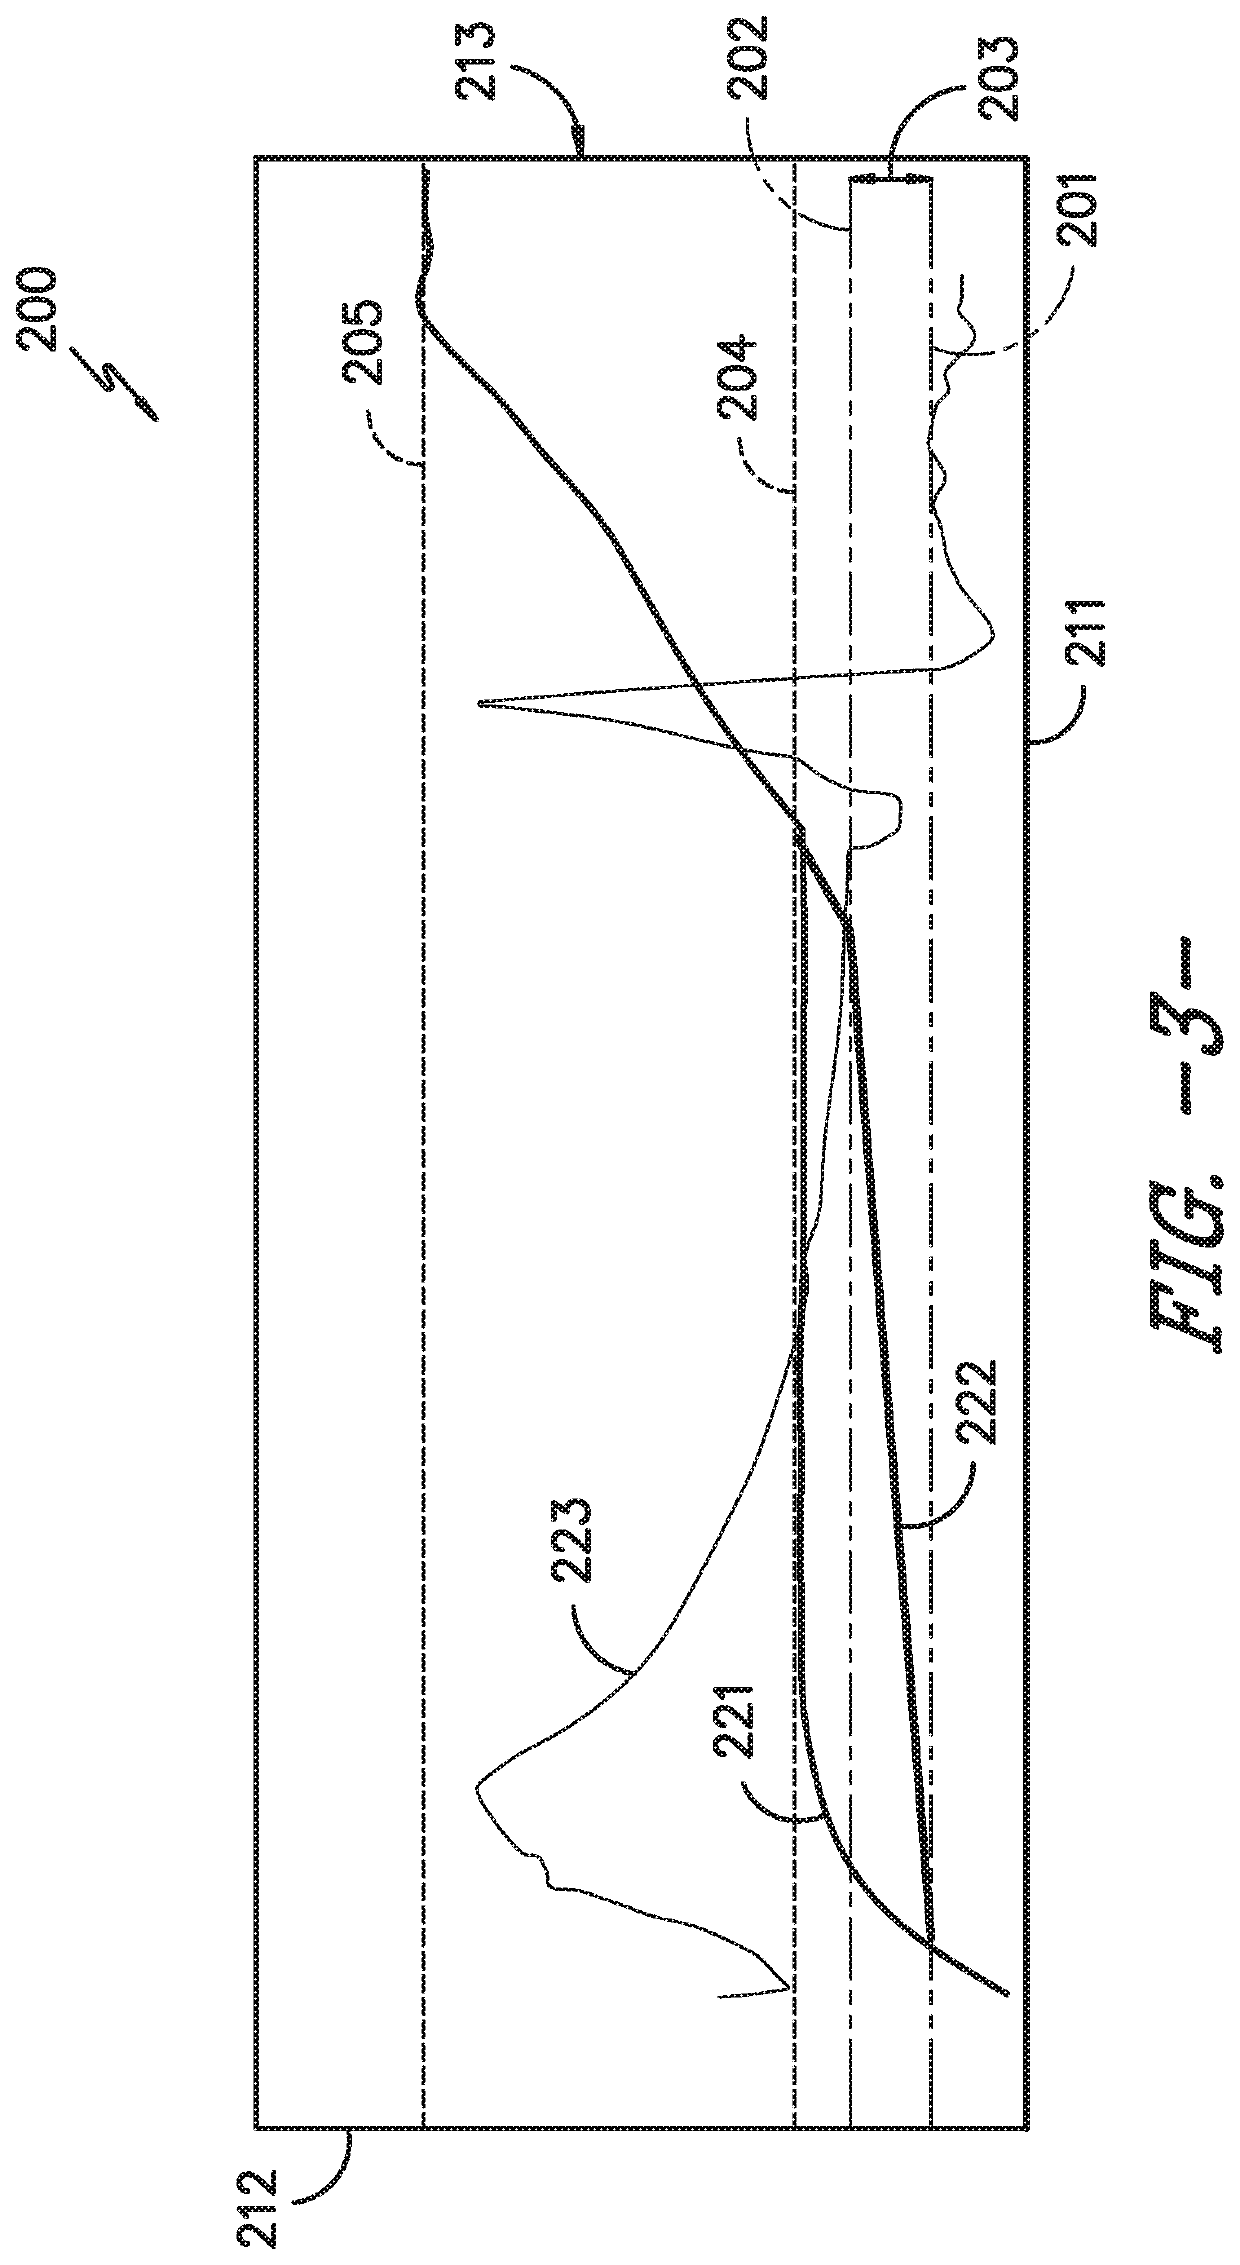 Method and system for mitigating bowed rotor operation of gas turbine engine